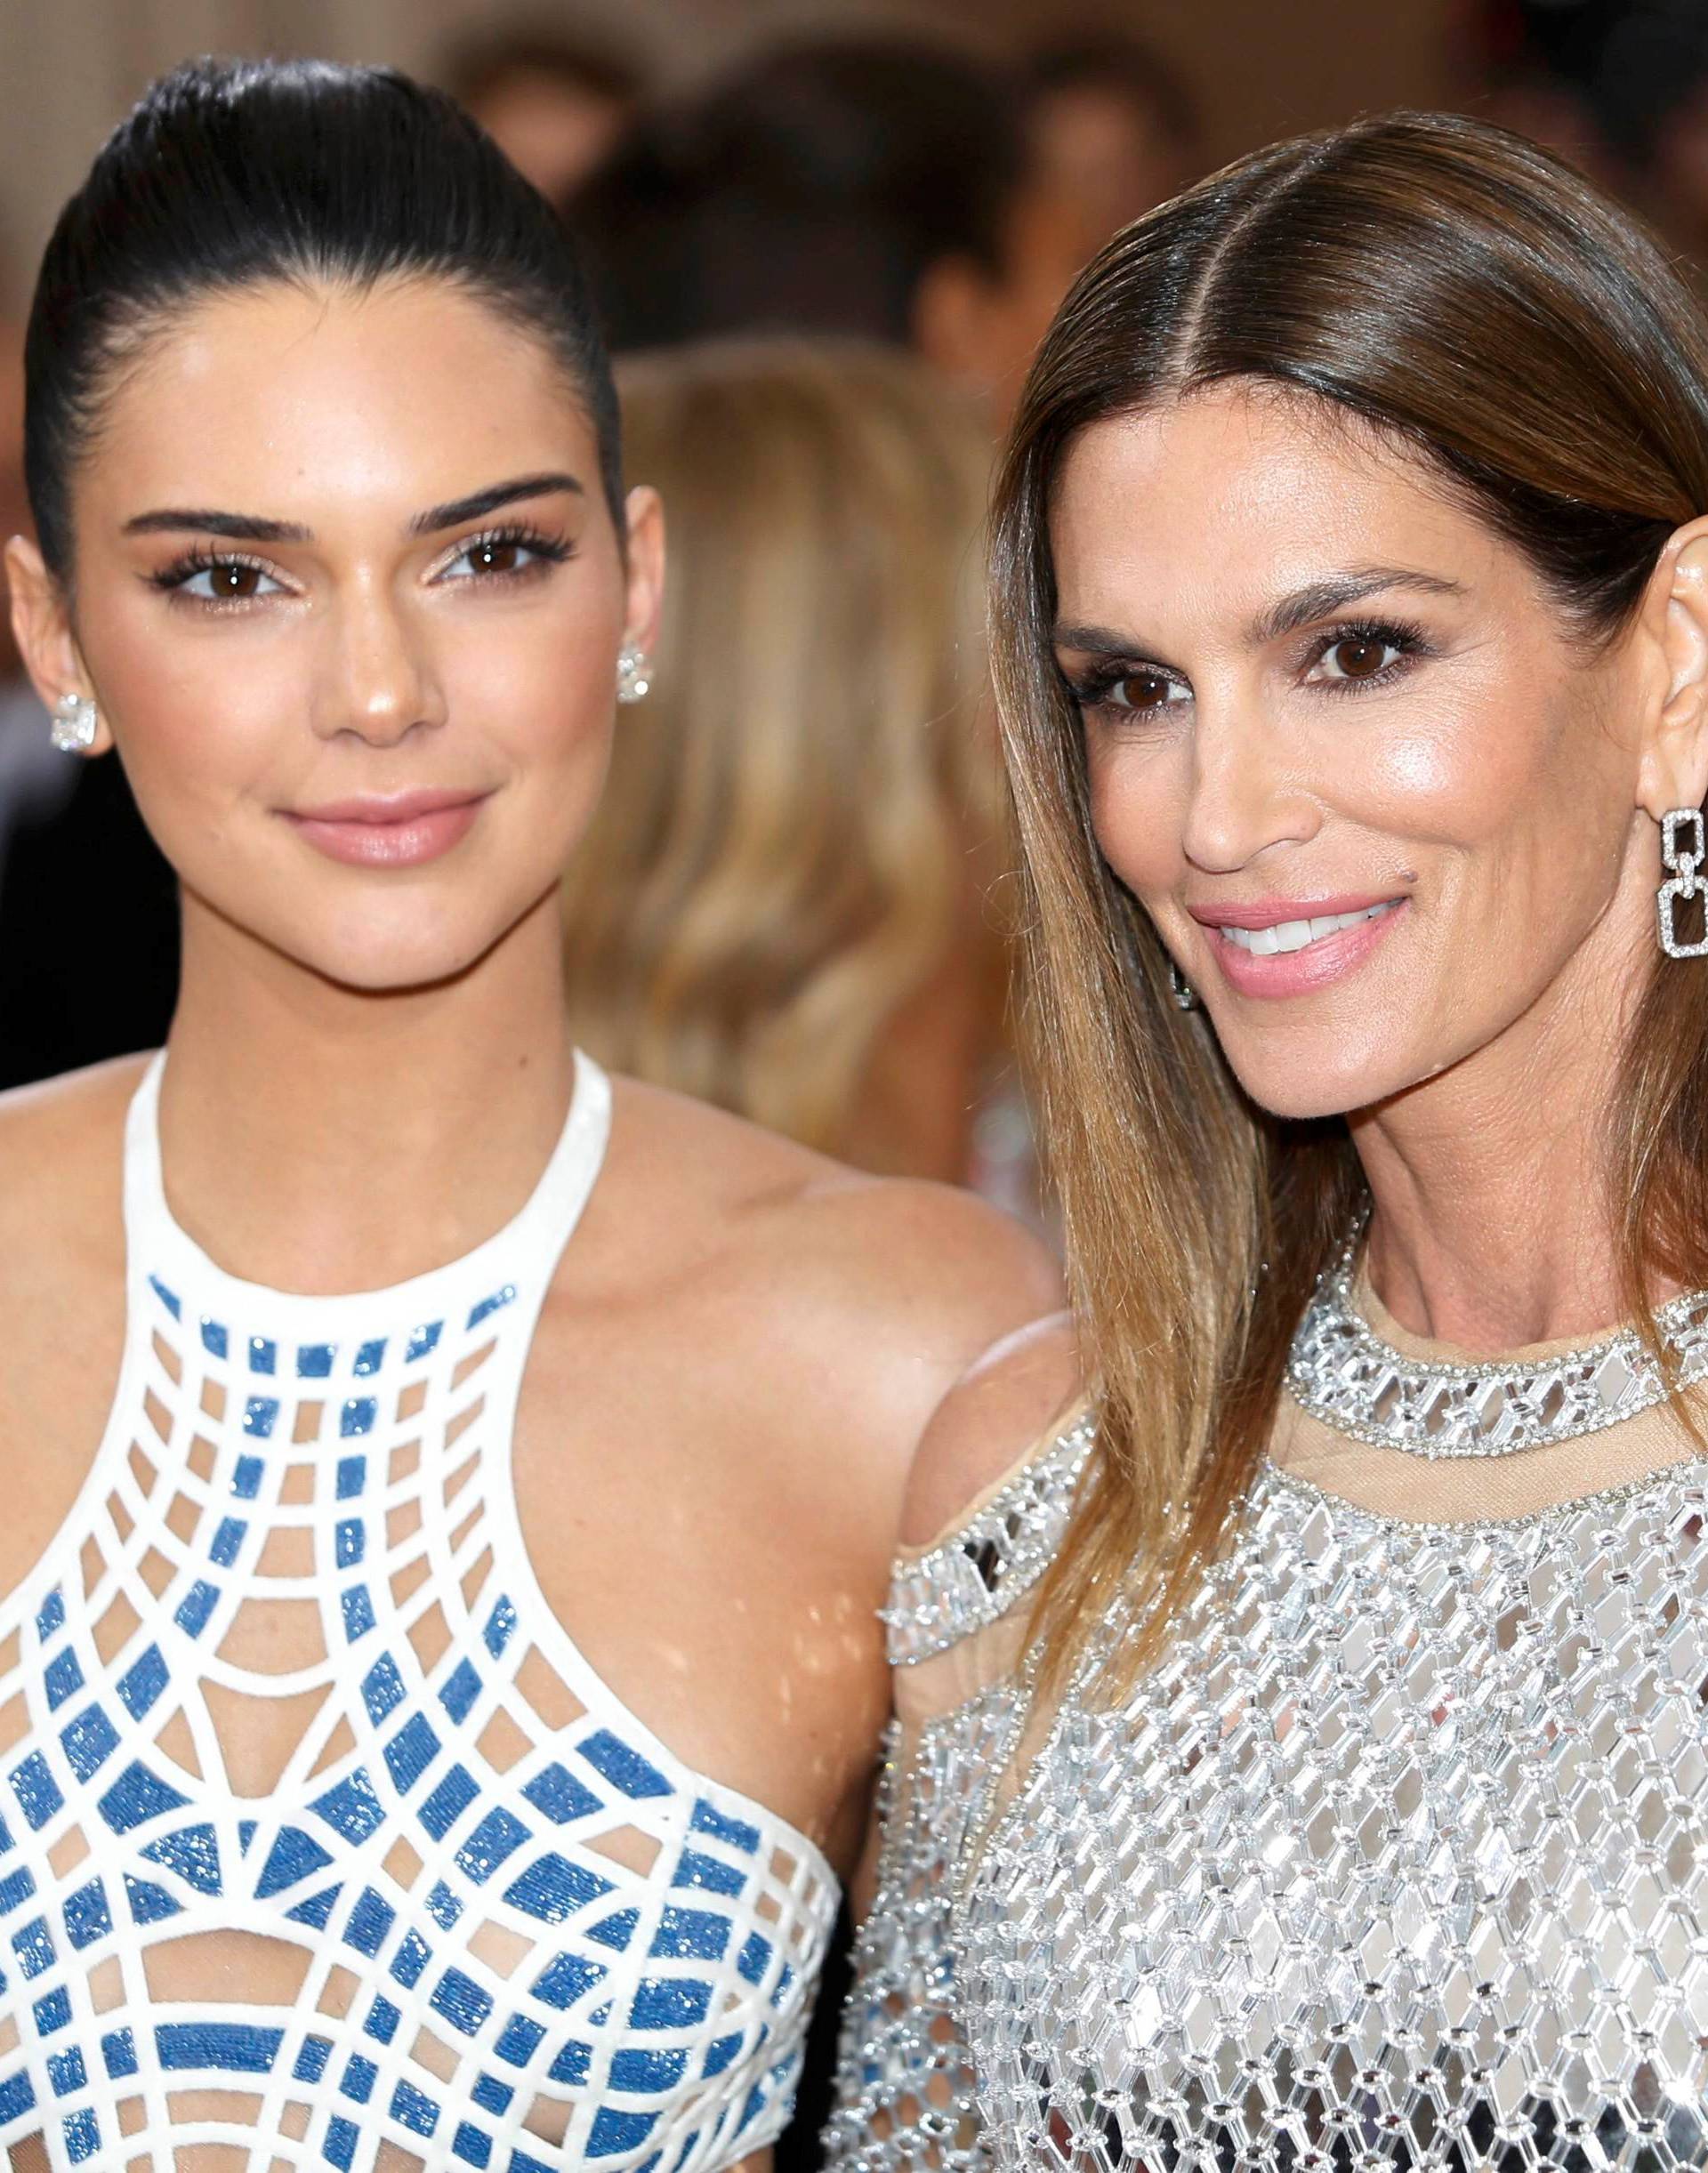 Television personality Jenner and model Crawford arrive at the Met Gala in New York